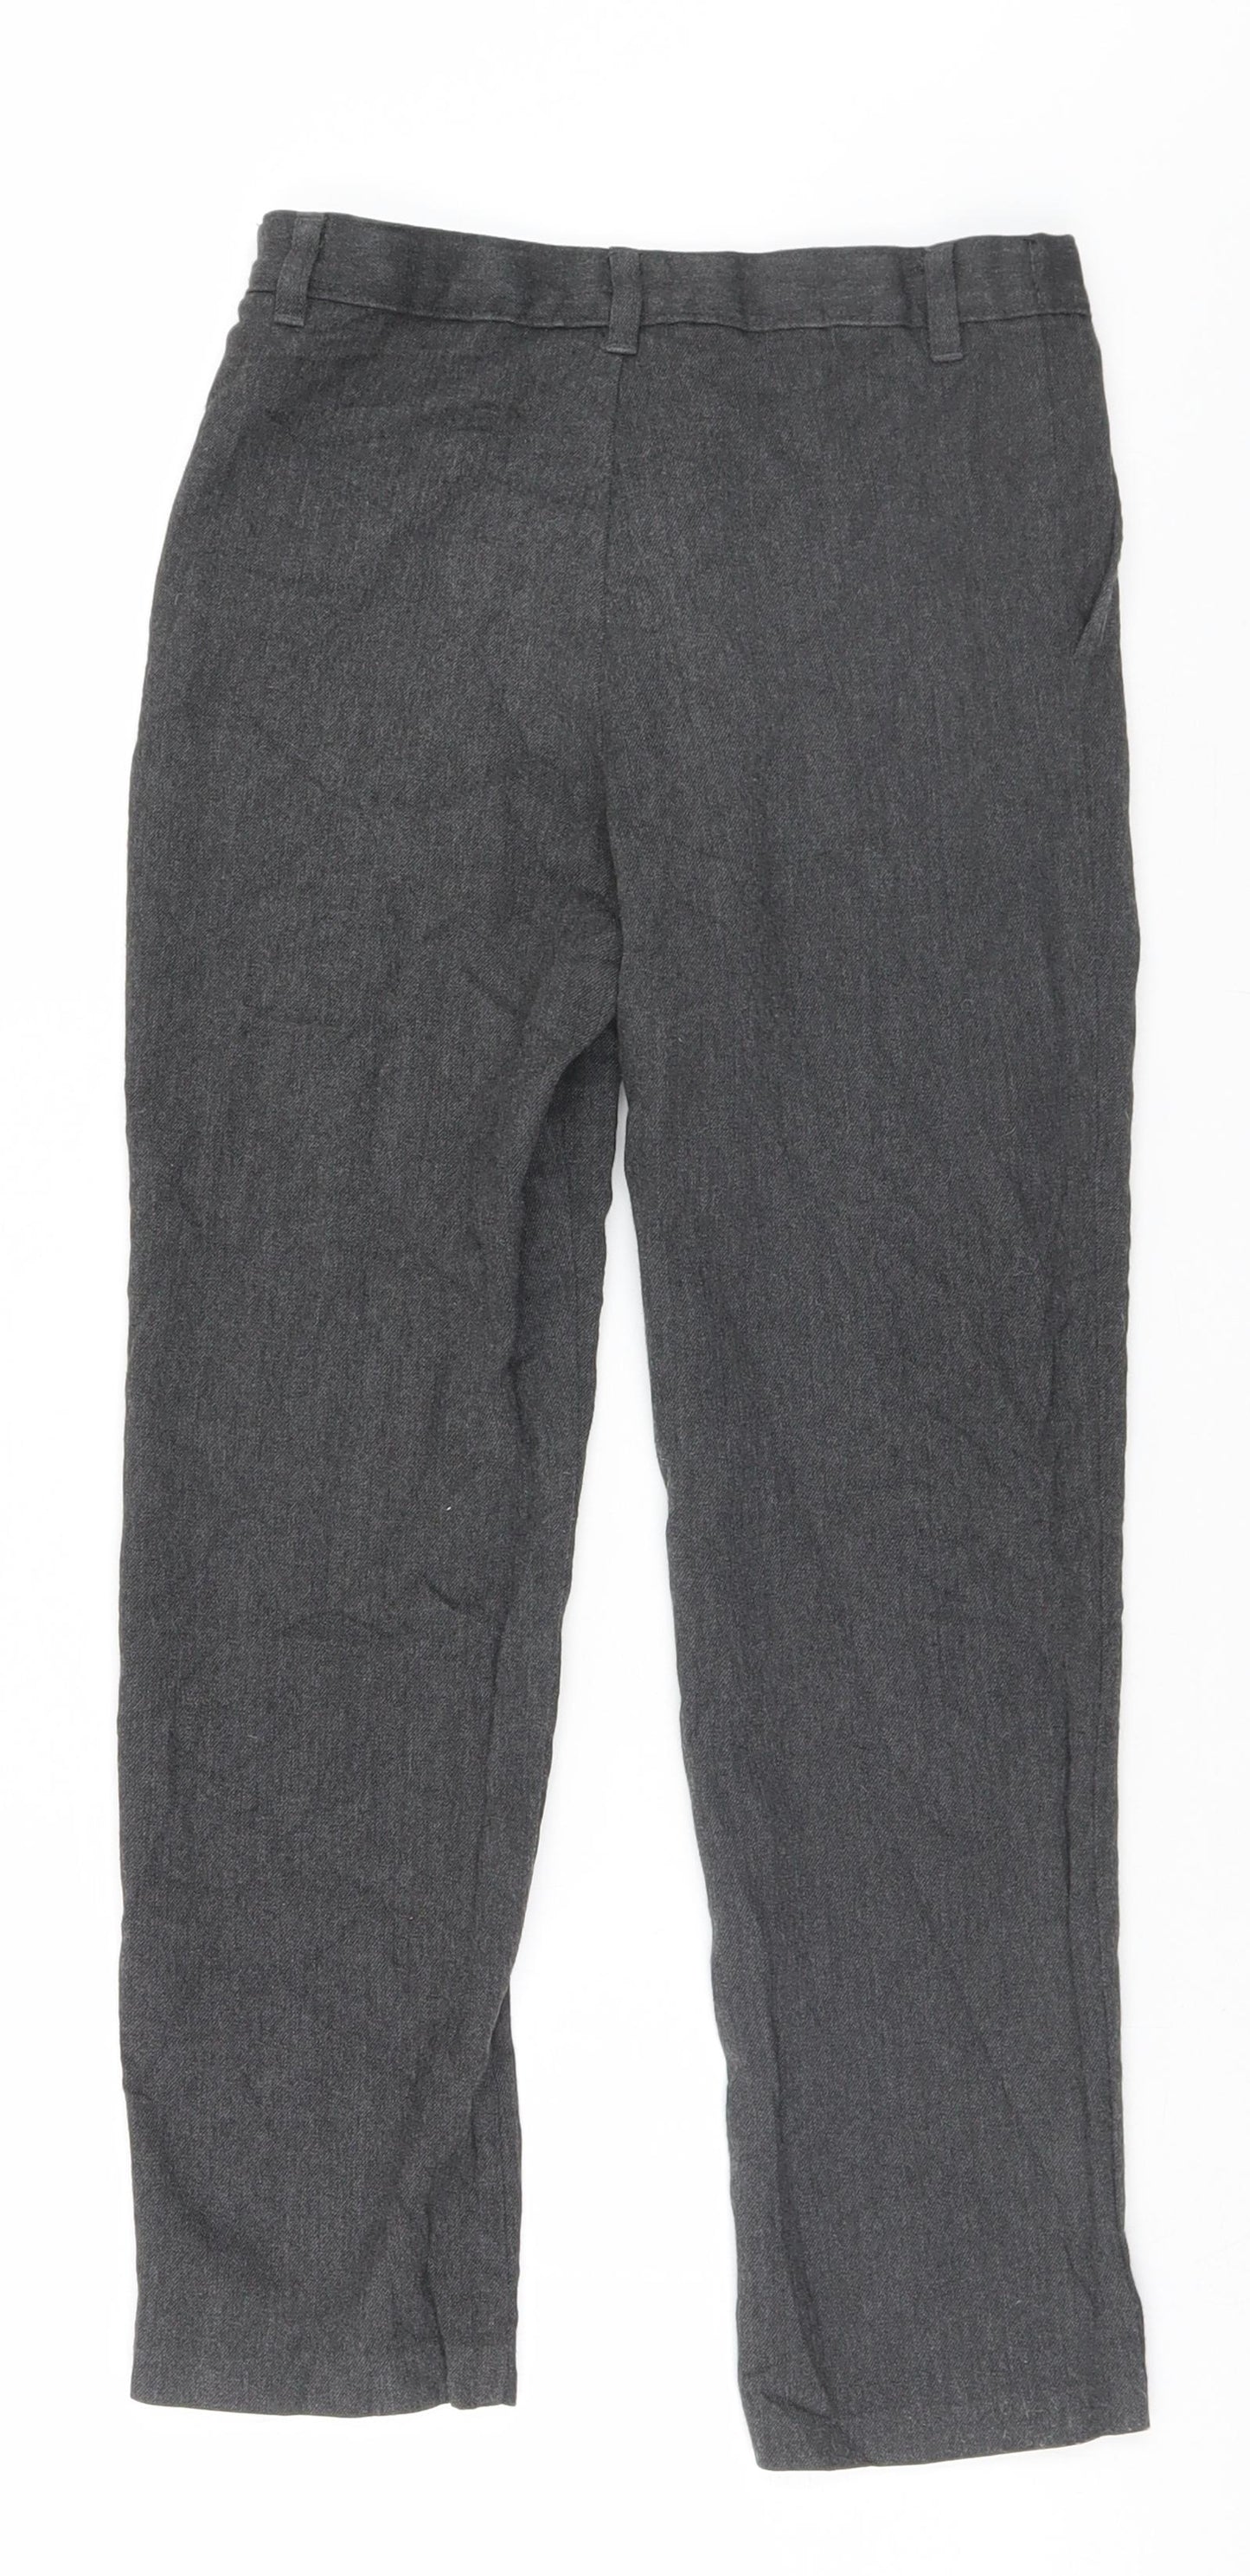 George Boys Grey   Carpenter Trousers Size 8-9 Years - School